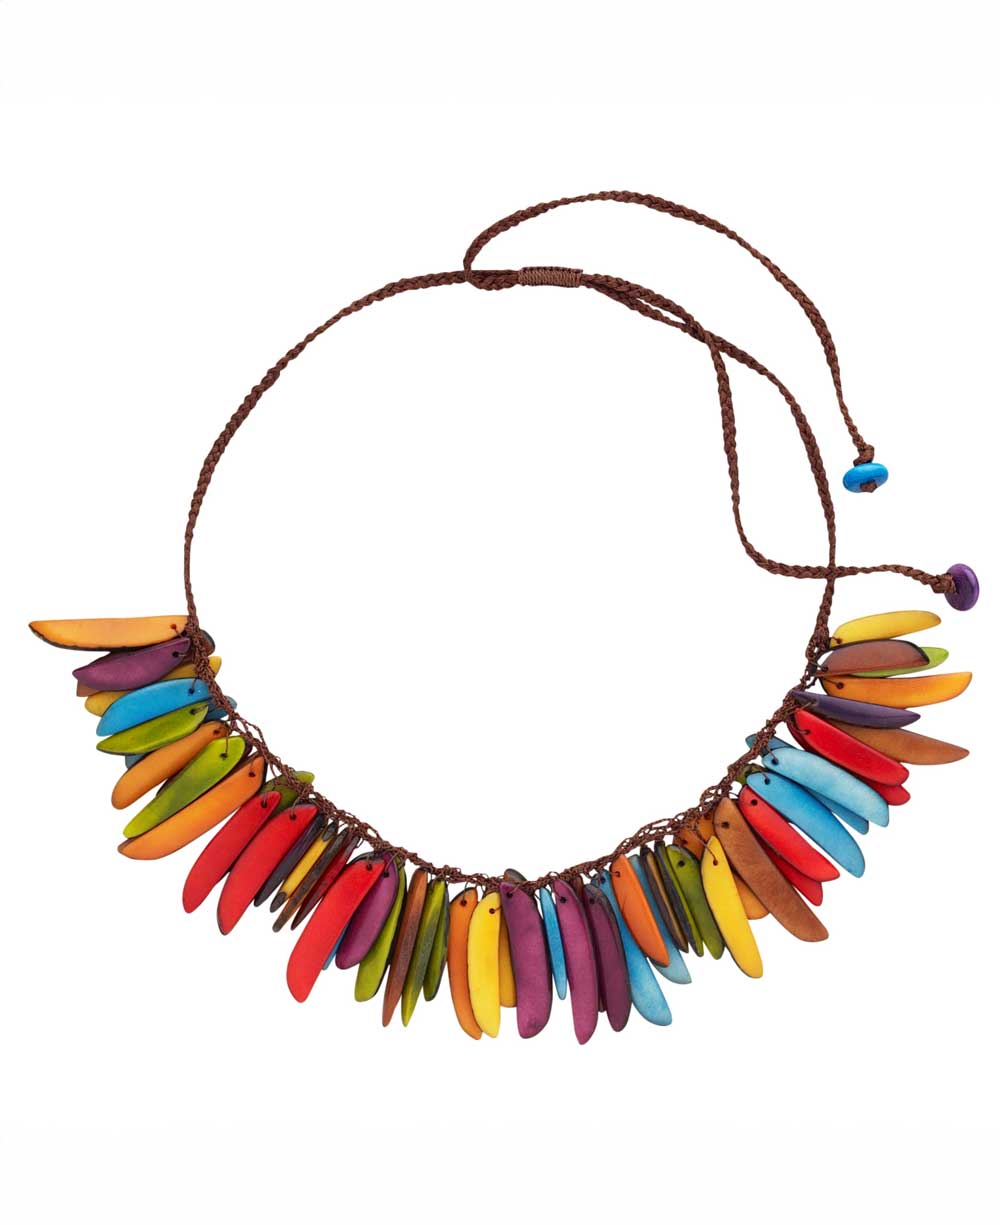 TTH-N340 Vibrant Tagua Nut Necklace